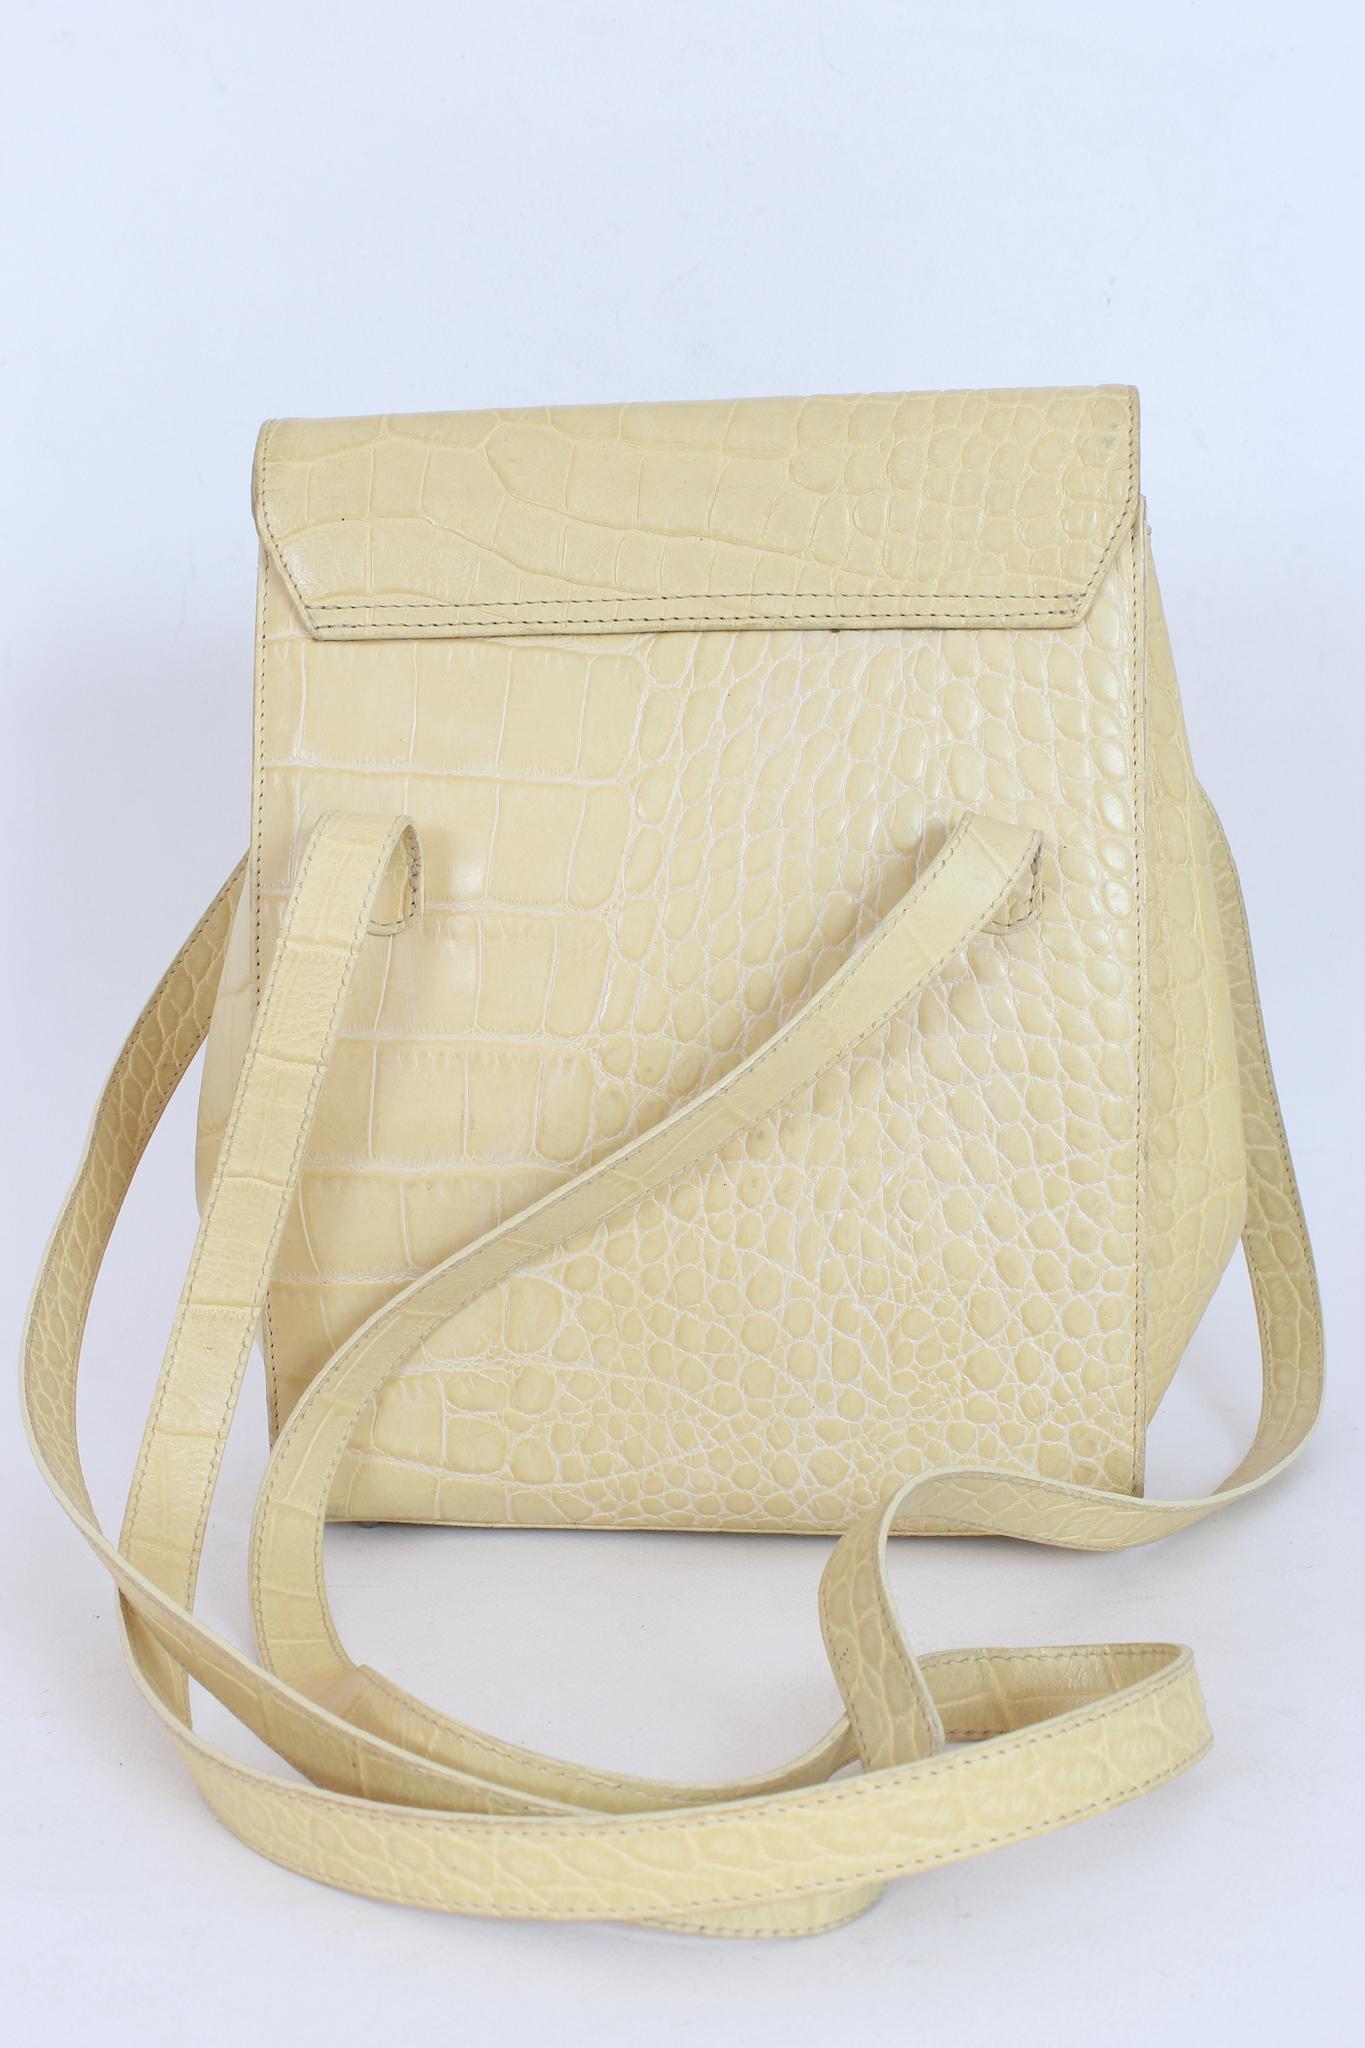 Gianni Versace Beige Leather Vintage Bucket Bag 1990s In Good Condition For Sale In Brindisi, Bt